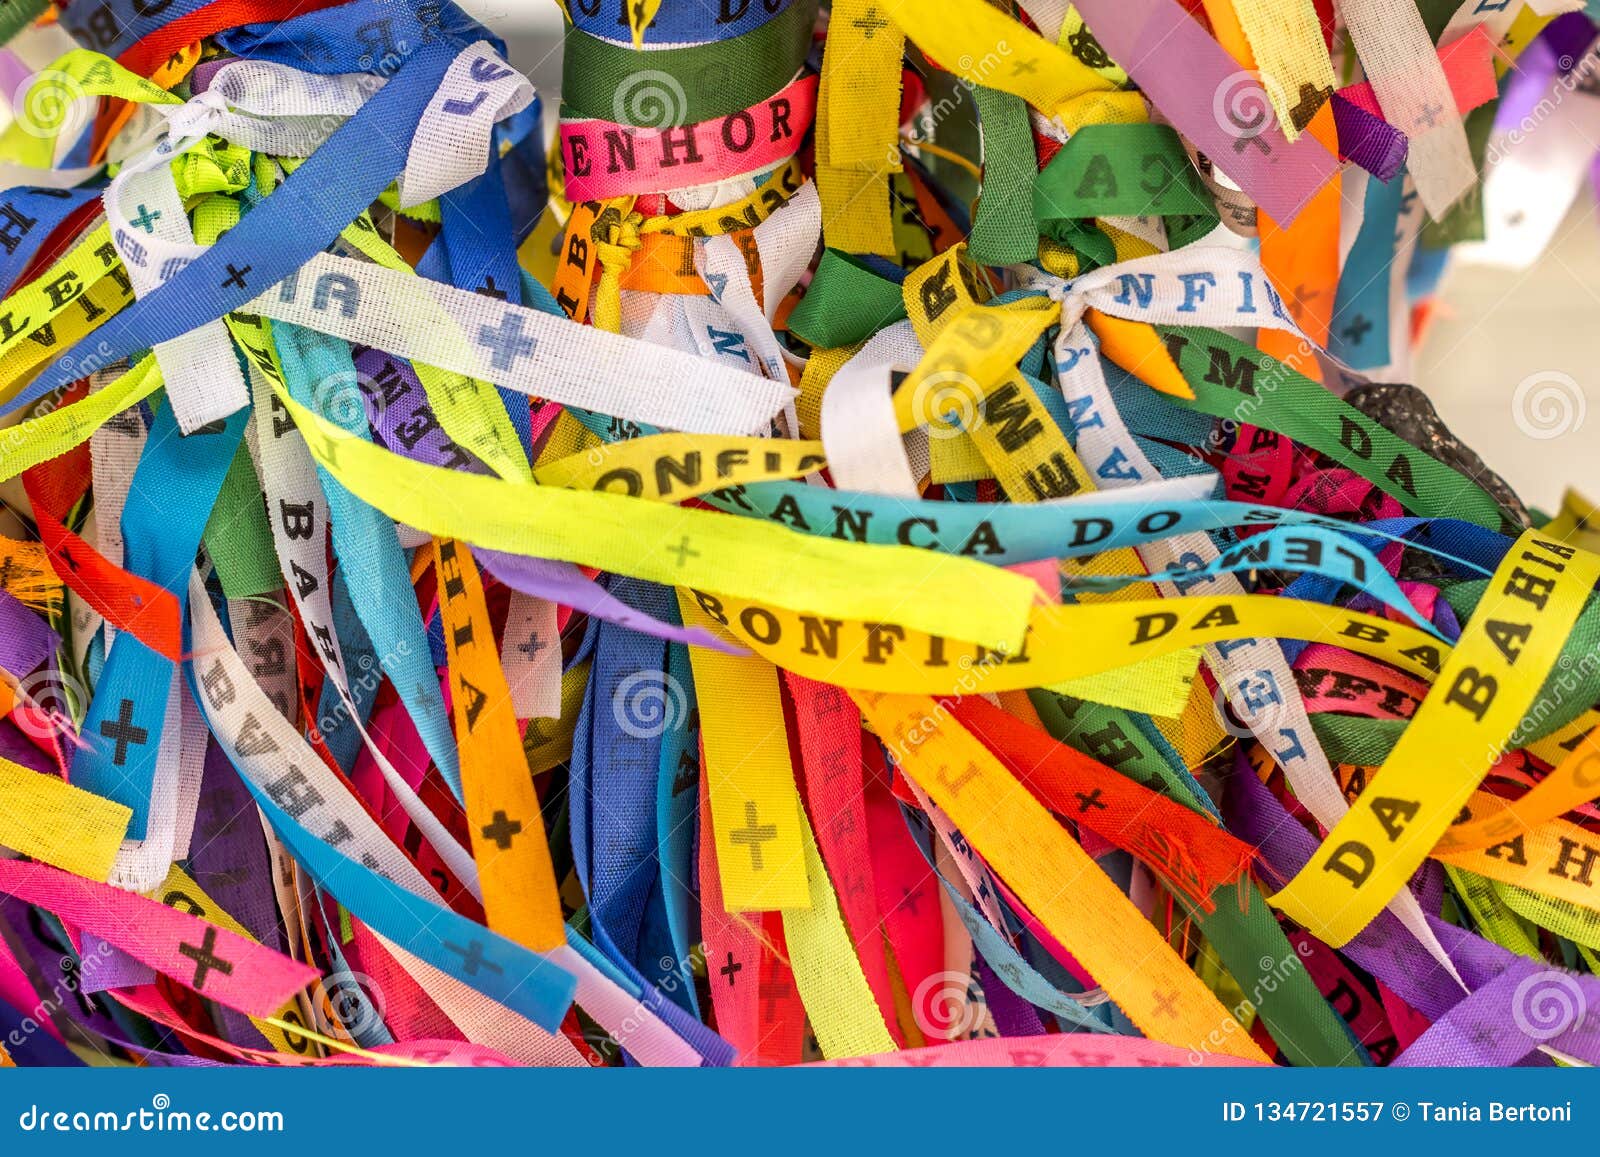 traditional colored ribbons called bonfim in bahia, brazil